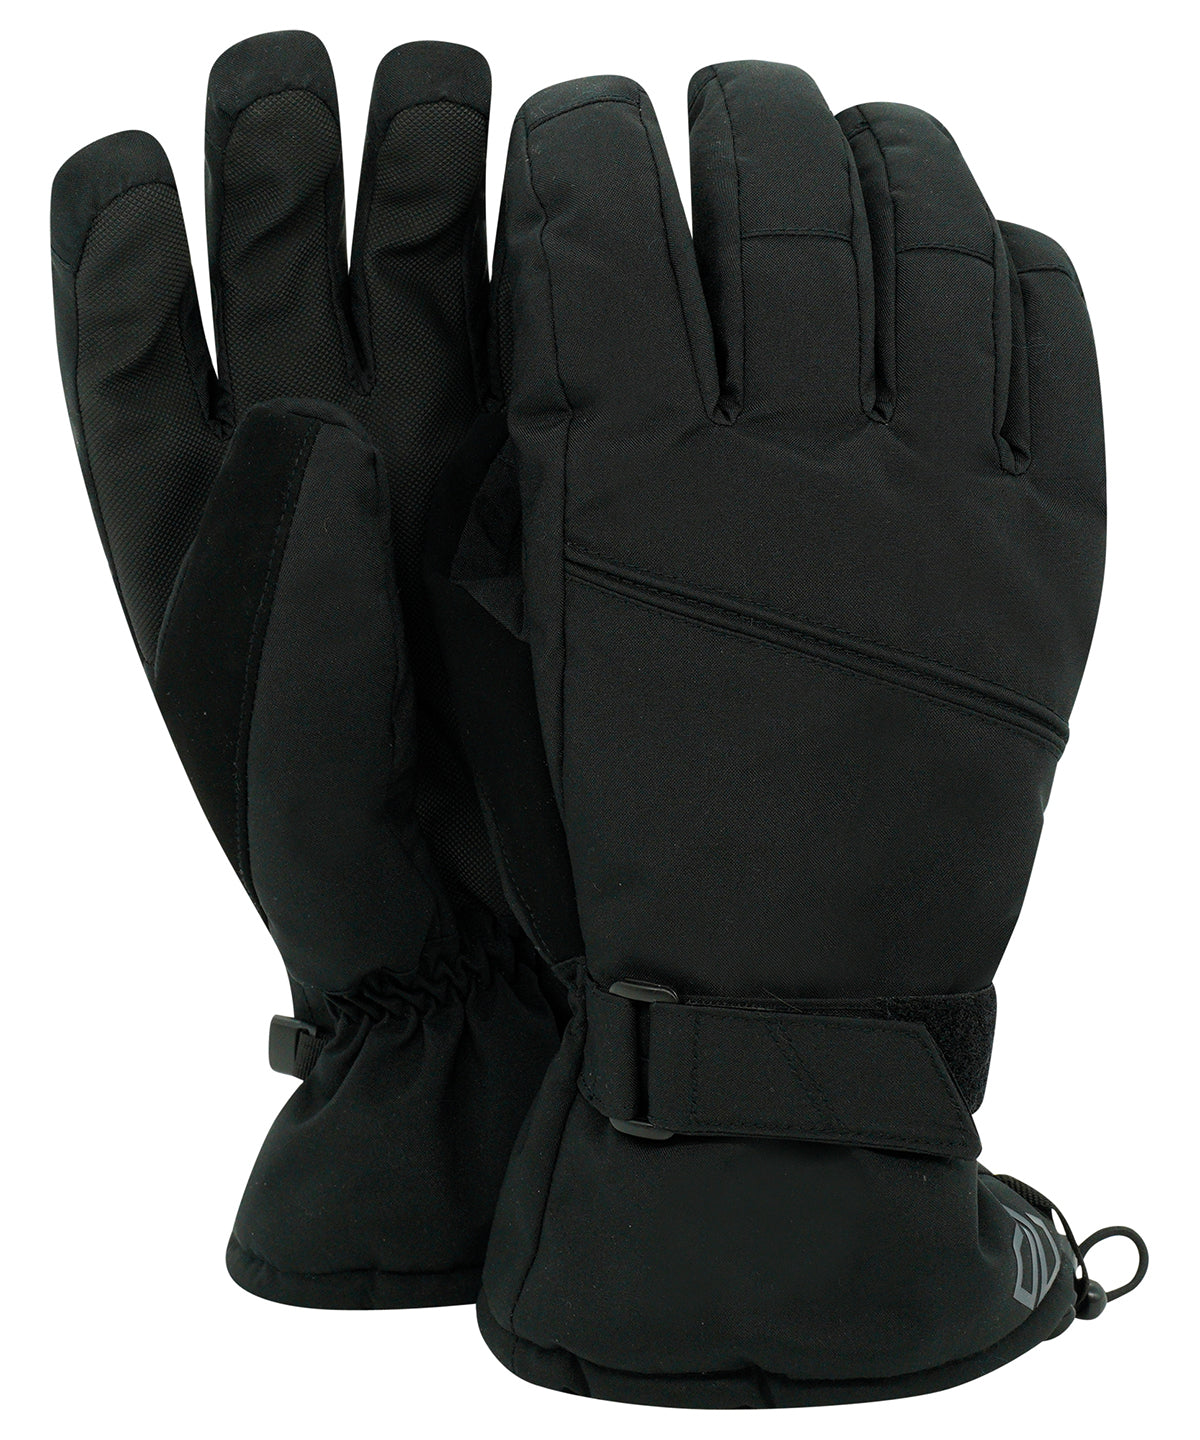 Hand In Waterproof Insulated Gloves